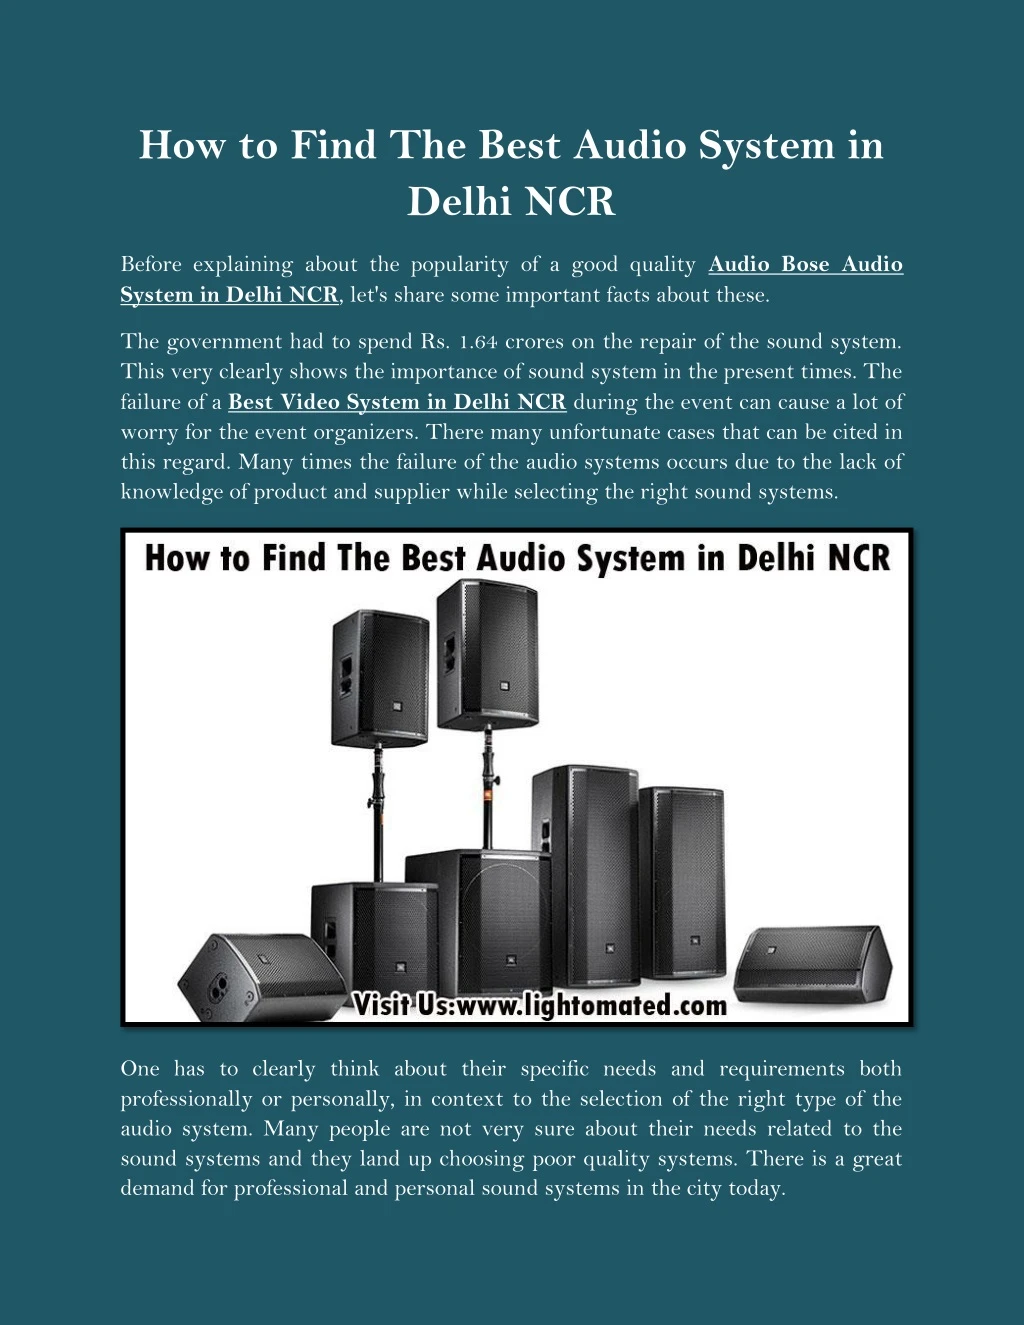 how to find the best audio system in delhi ncr